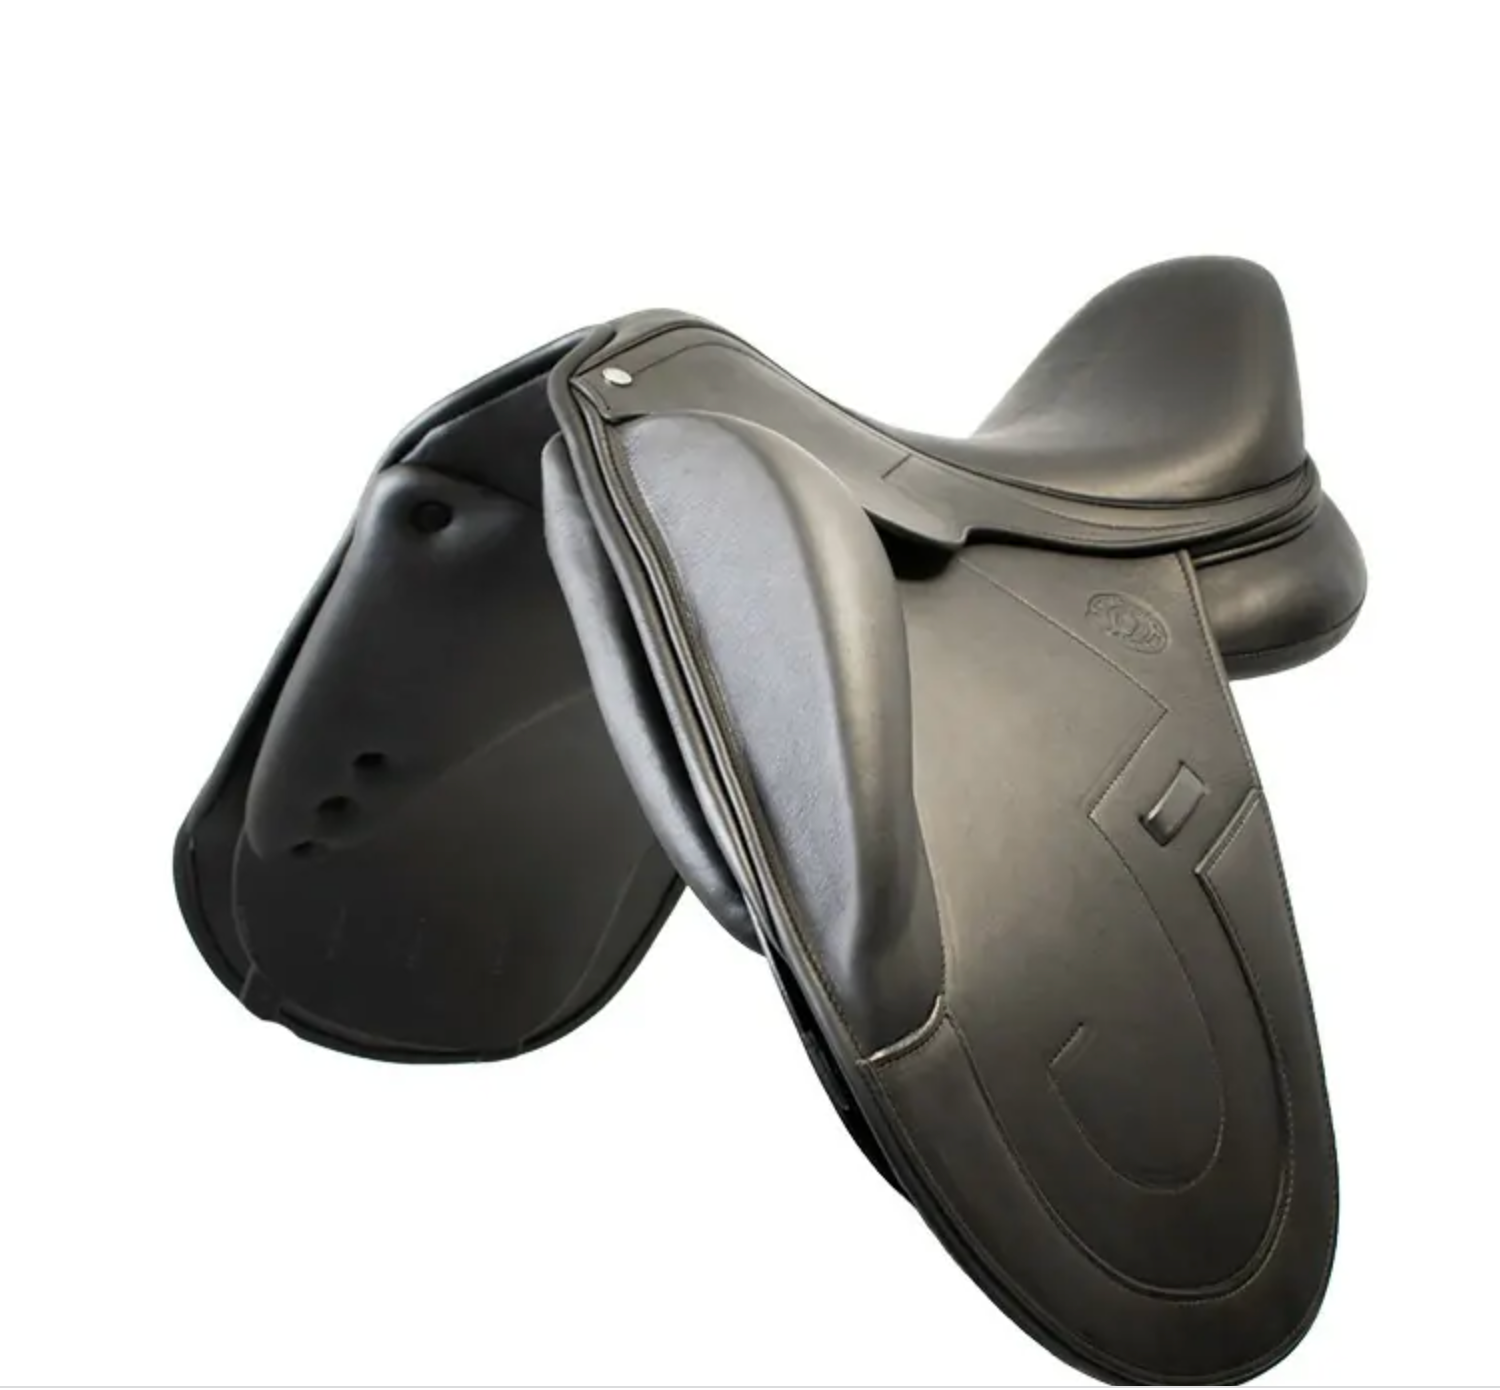 Gee Gee Equine Antares Signature Dressage Saddle Available for Purchase